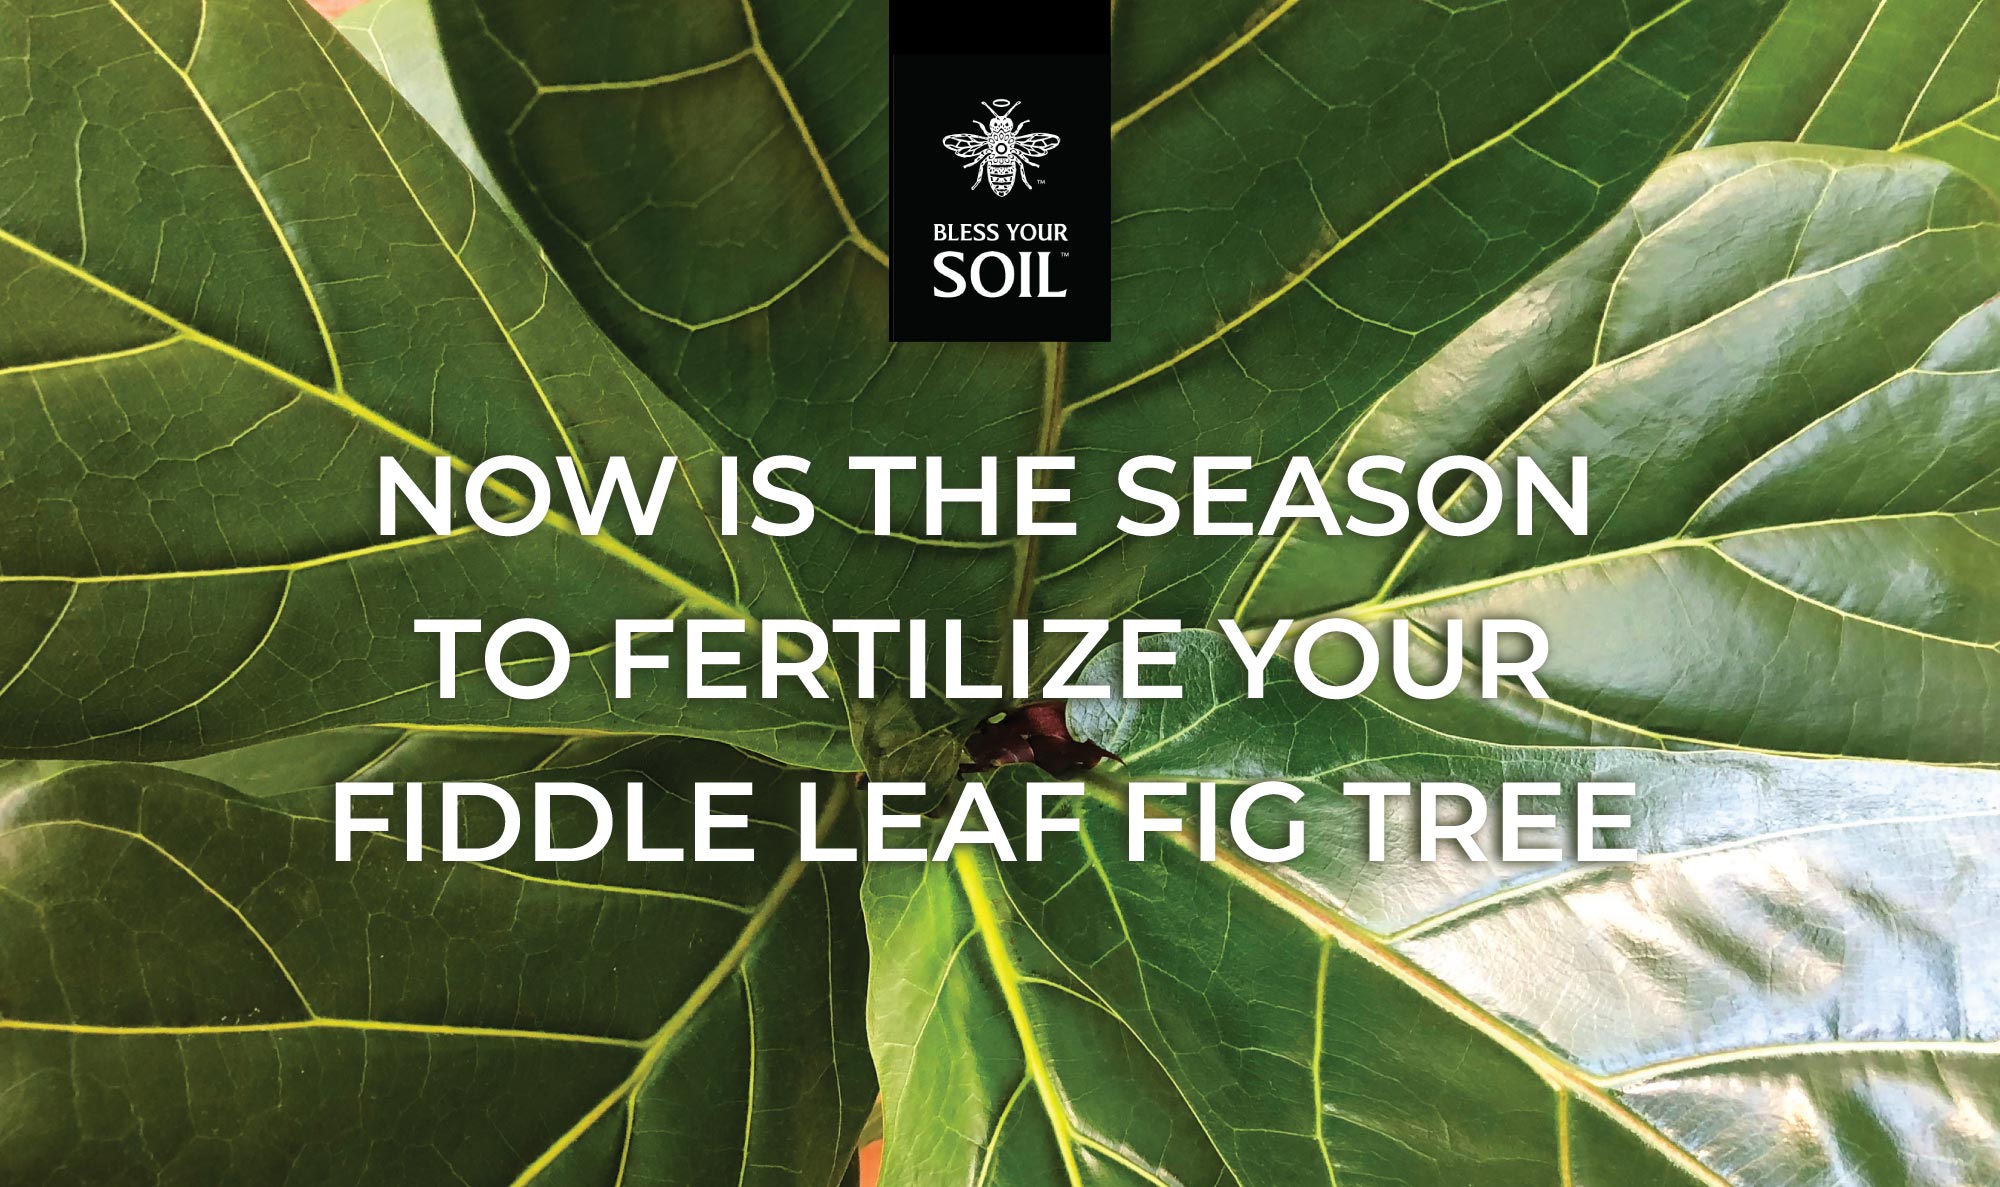 Now is the season to fertilize fiddle leaf tree – blessyoursoil.com